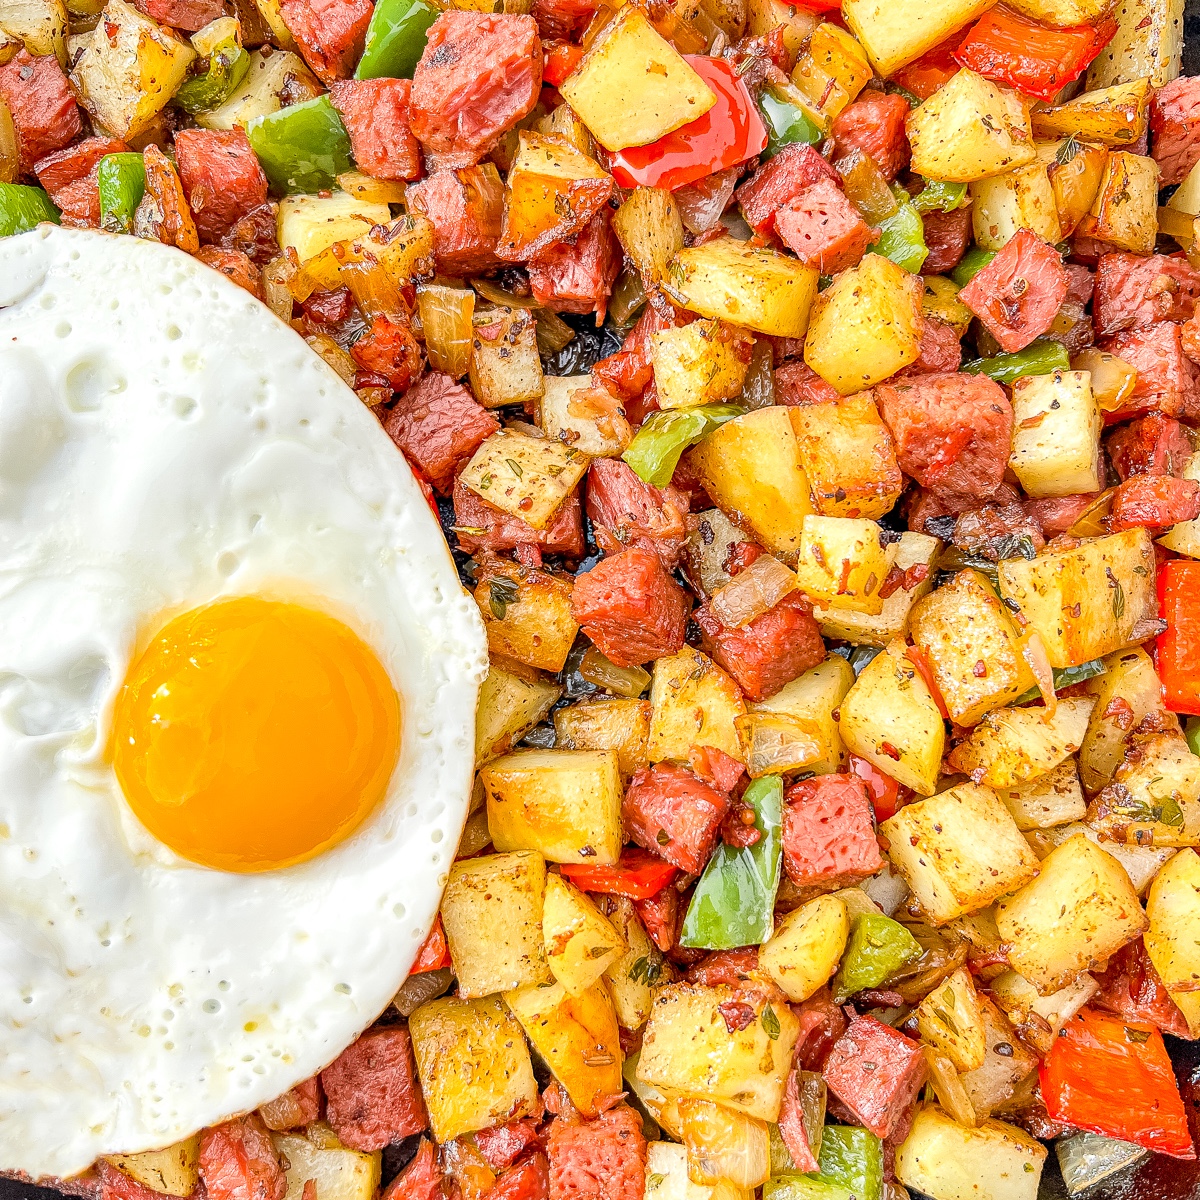 corned beef hash with a sunny side up egg.